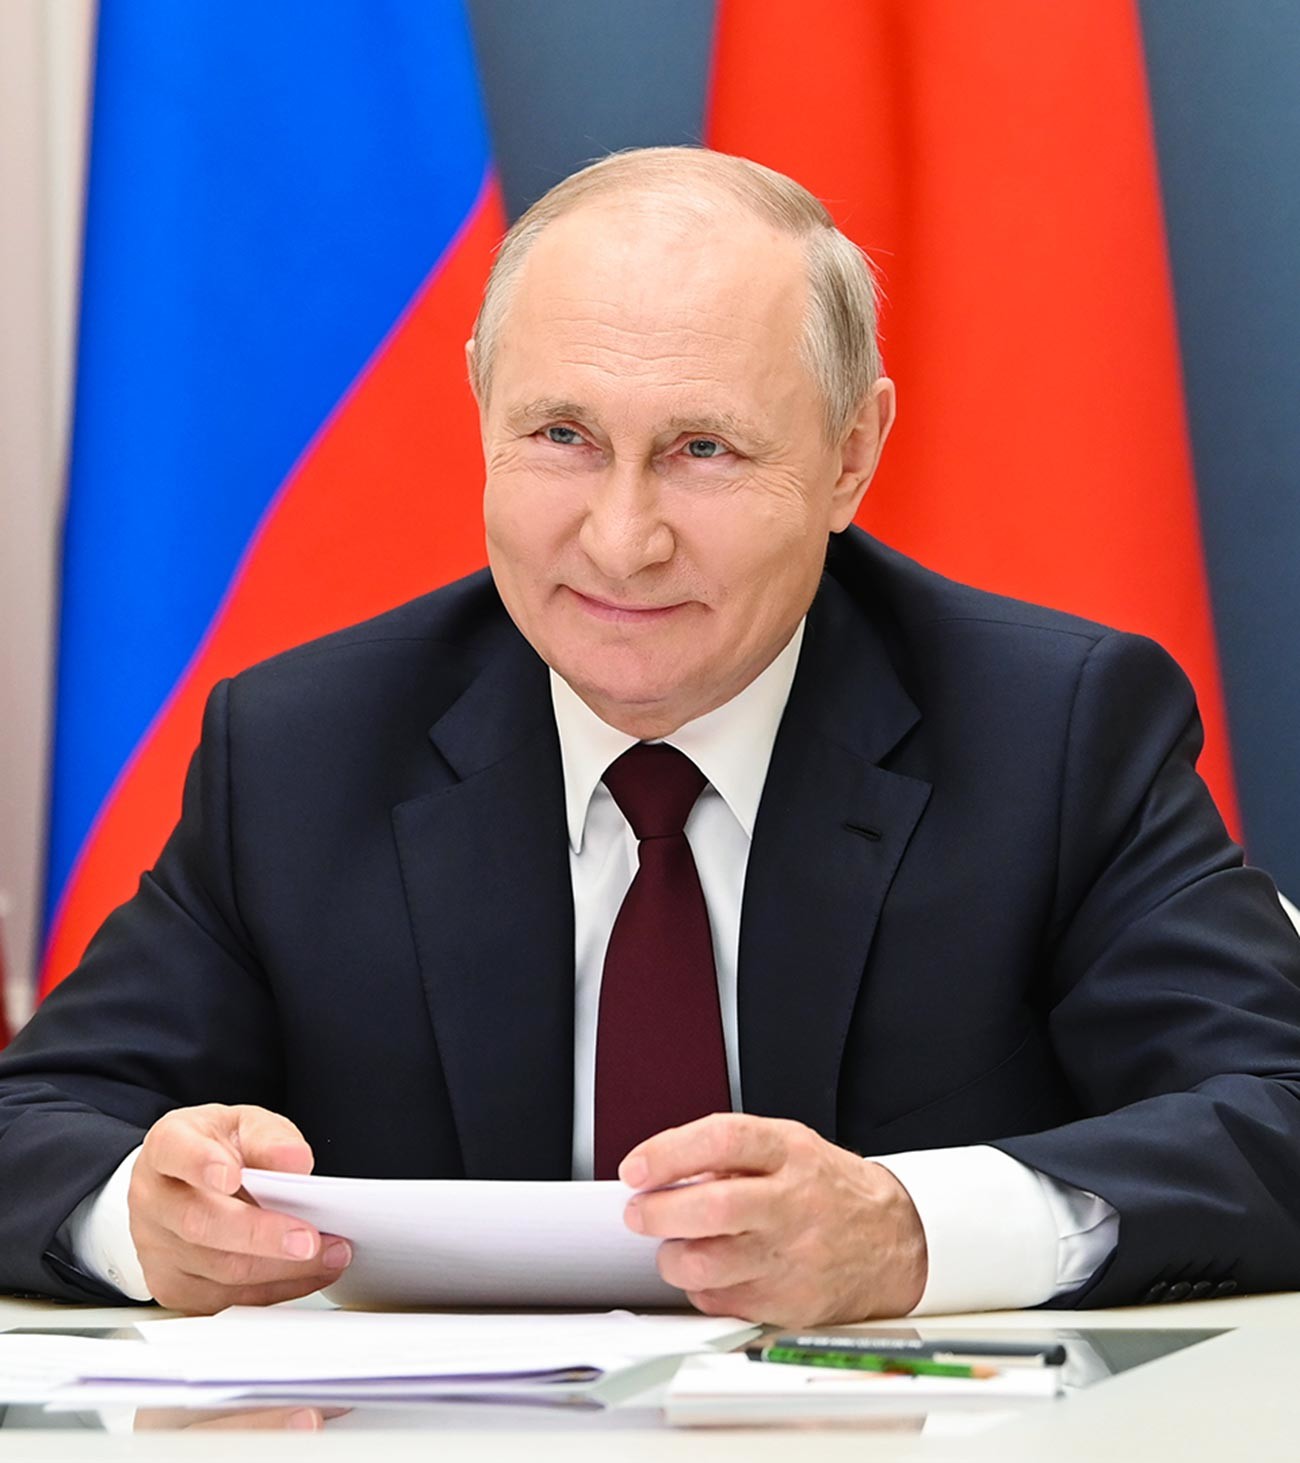 June 28, 2021. Russian President Vladimir Putin during a videoconference conversation with Chinese President Xi Jinping.